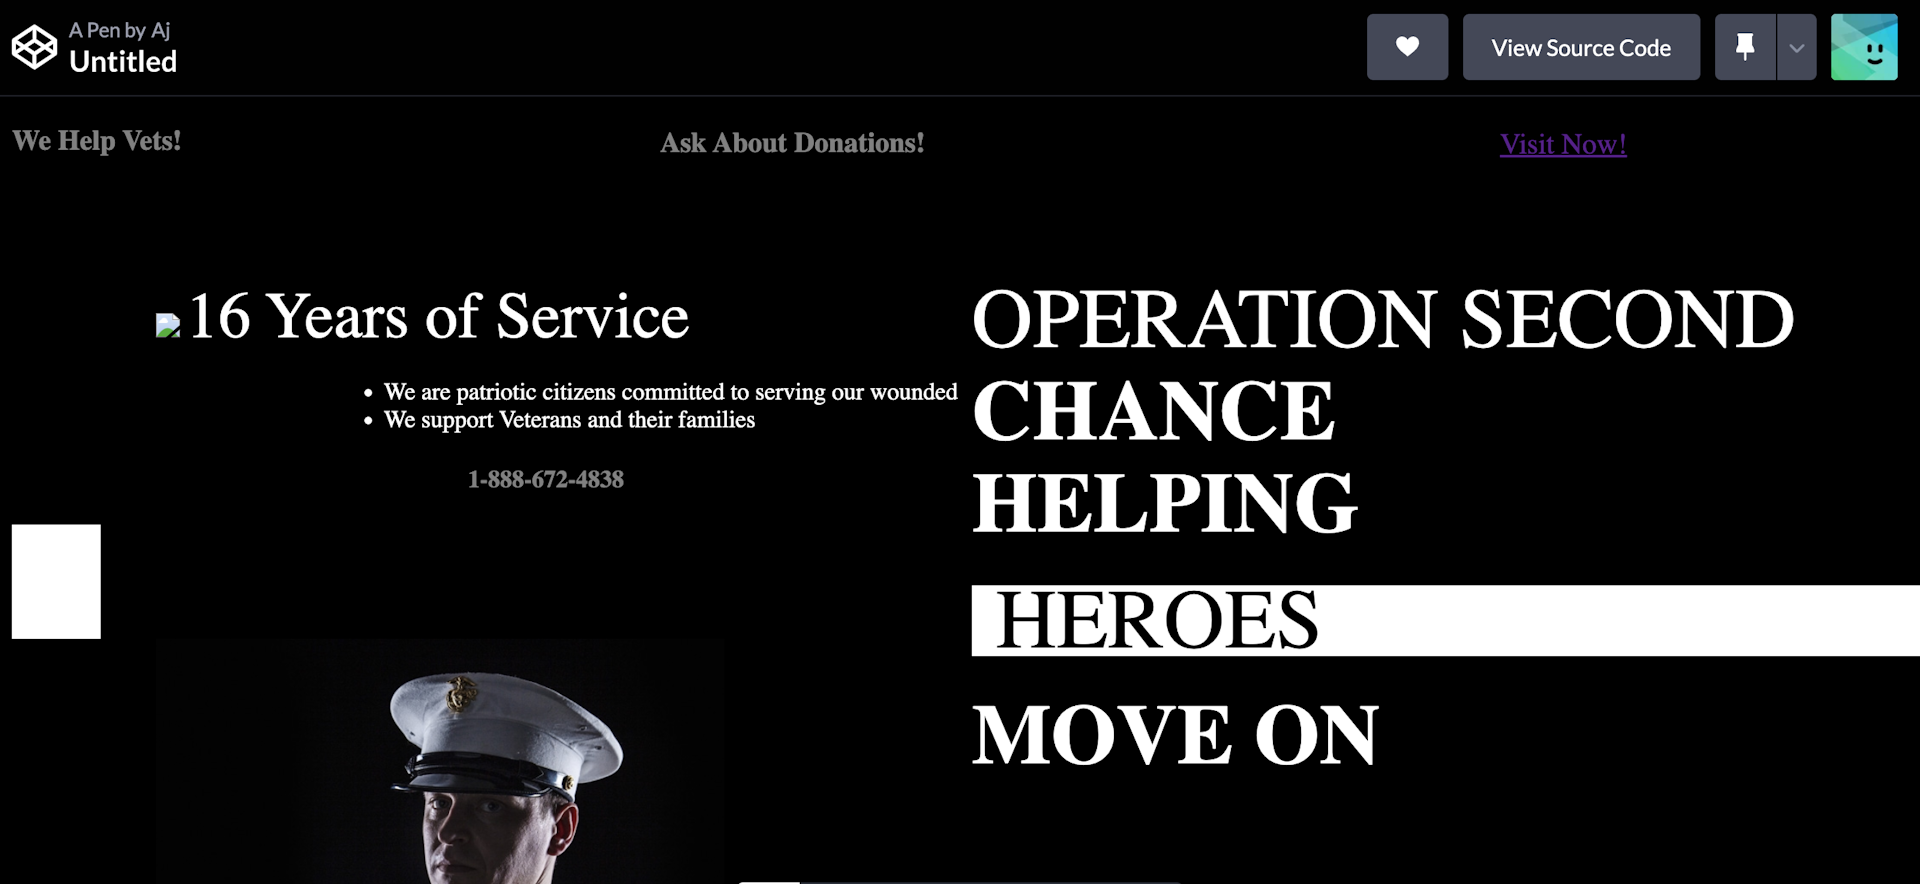 AD For Non-Profit "Operation Second Chance"